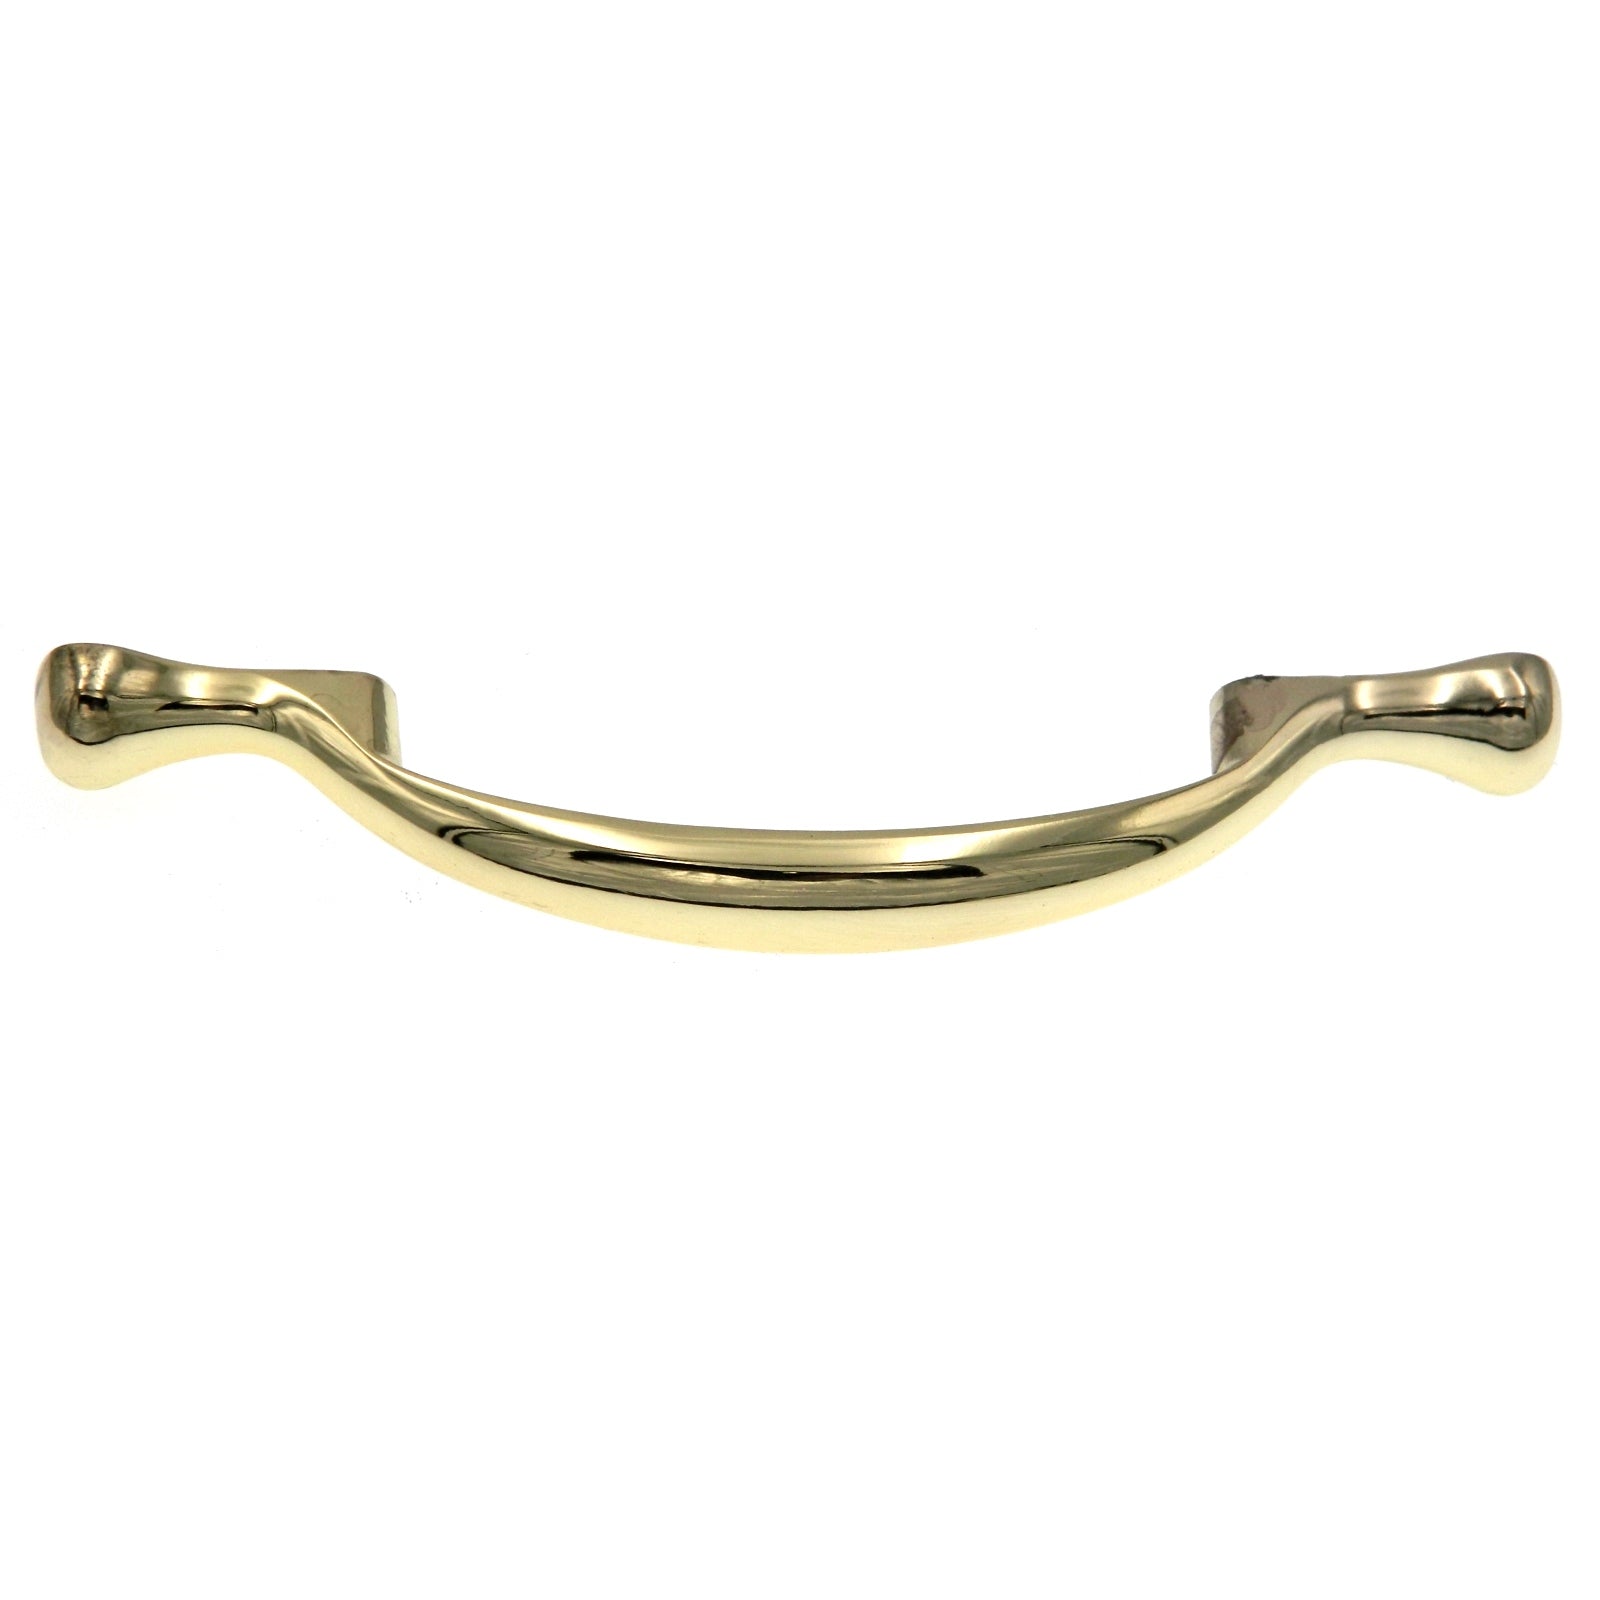 10 Pack Warwick Traditional Polished Brass 3"cc Solid Cabinet Handle Pull DH1009PB